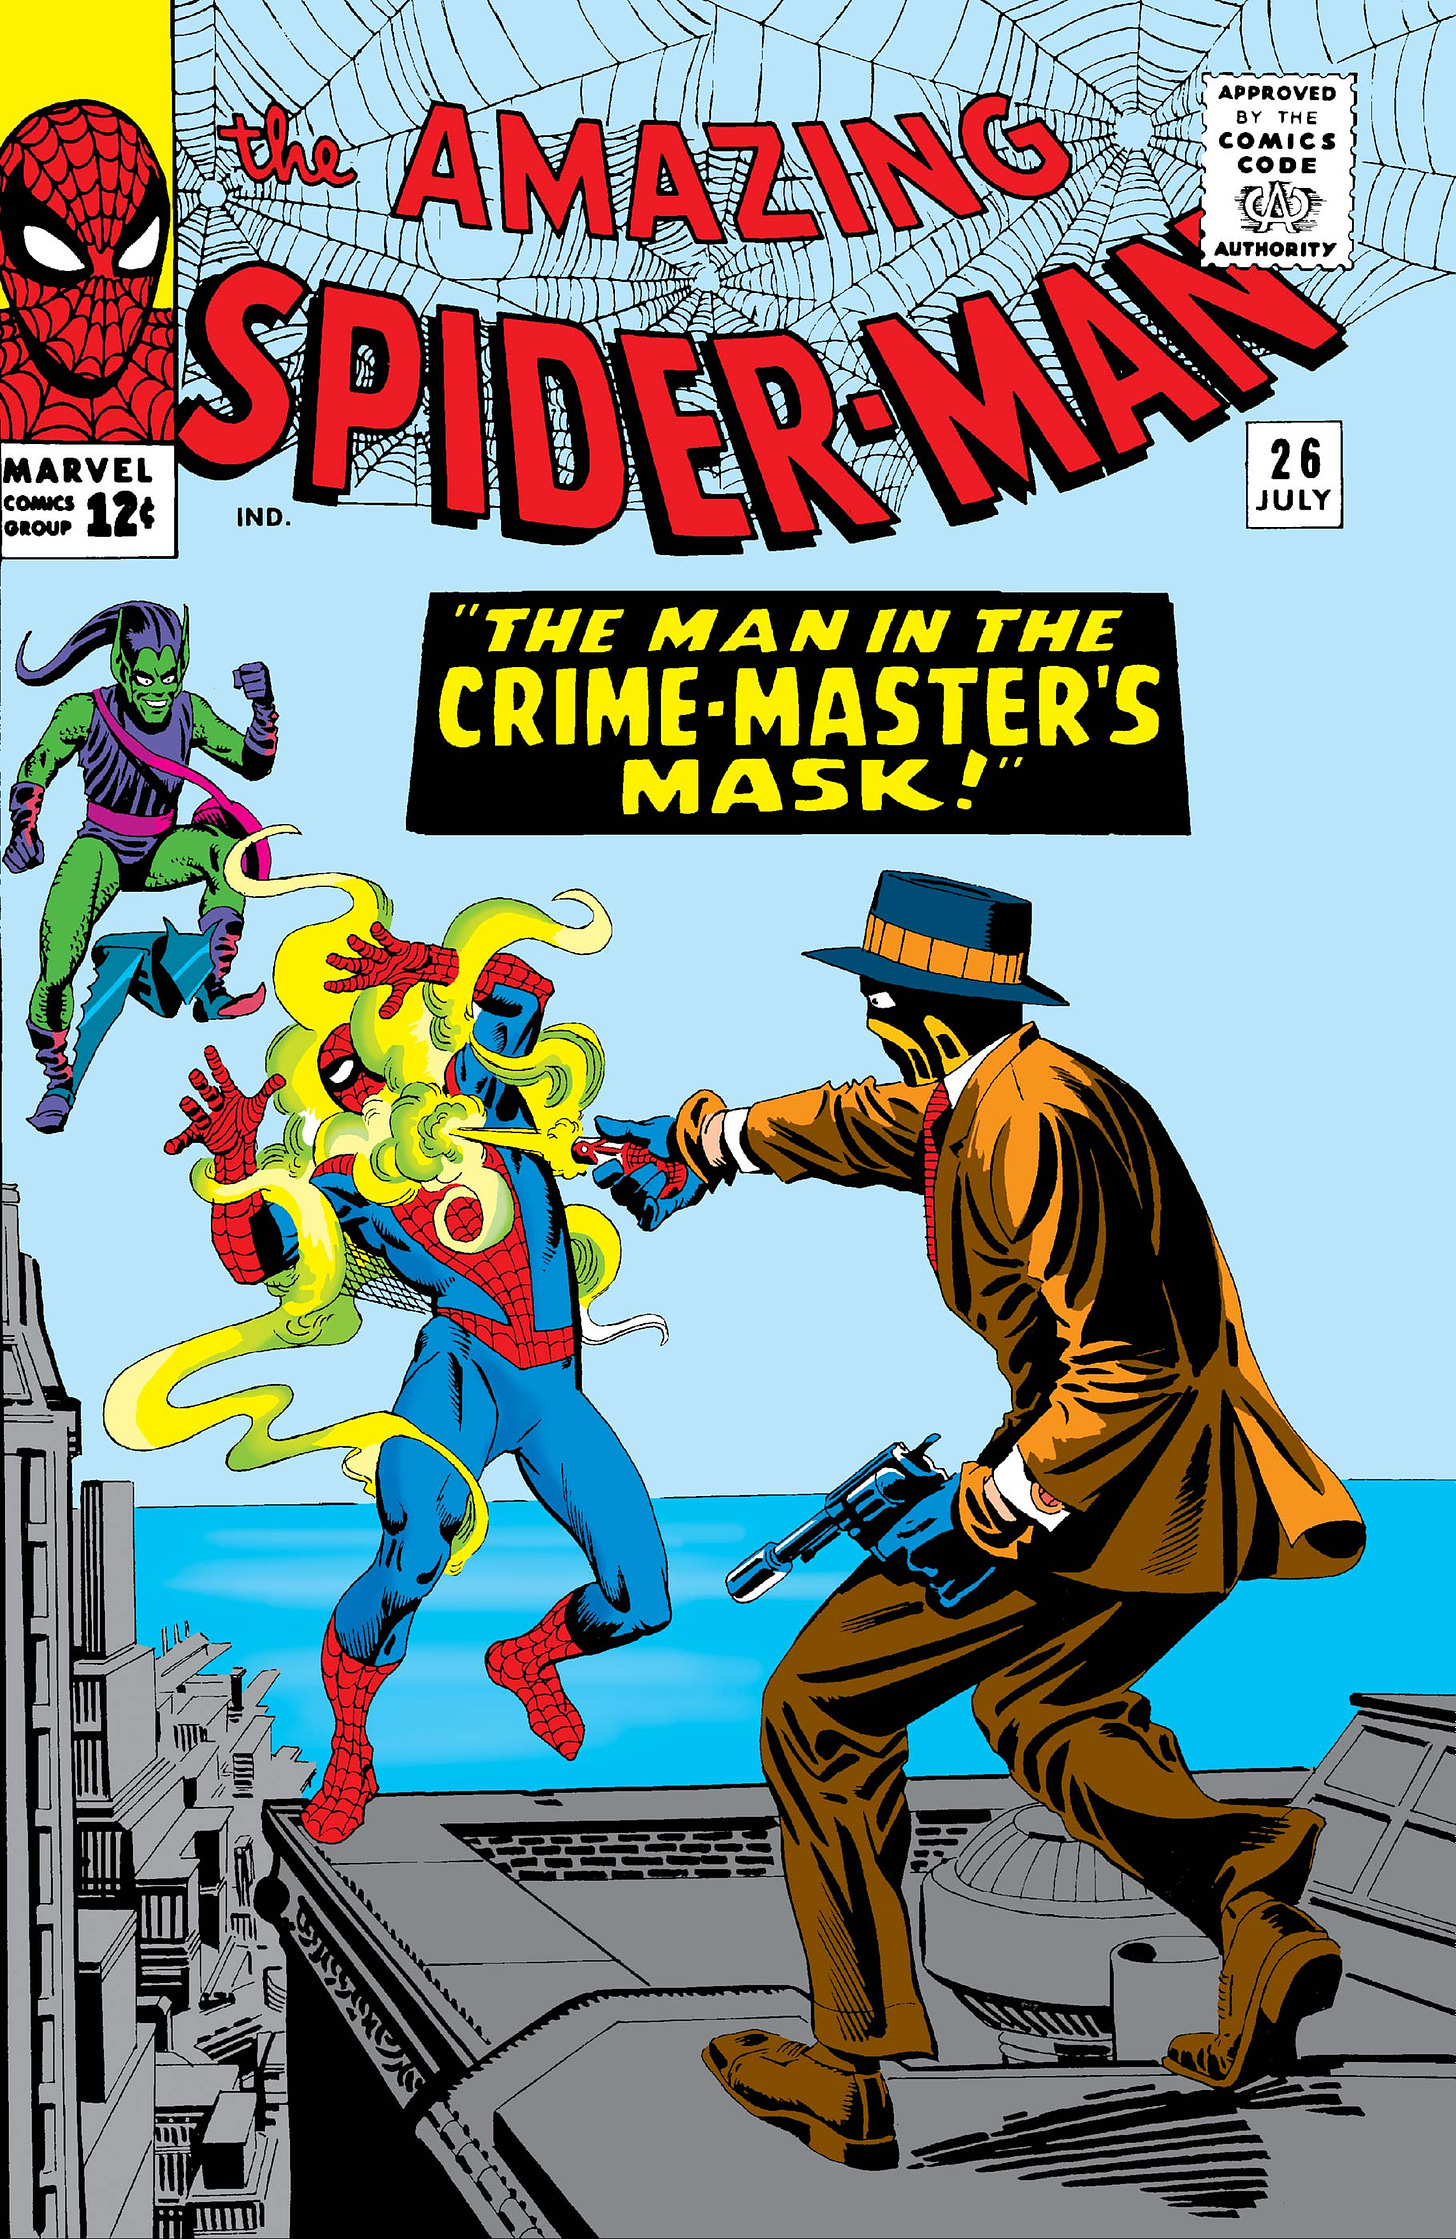 The Amazing Spider-Man (1963) #26 | Comic Issues | Marvel